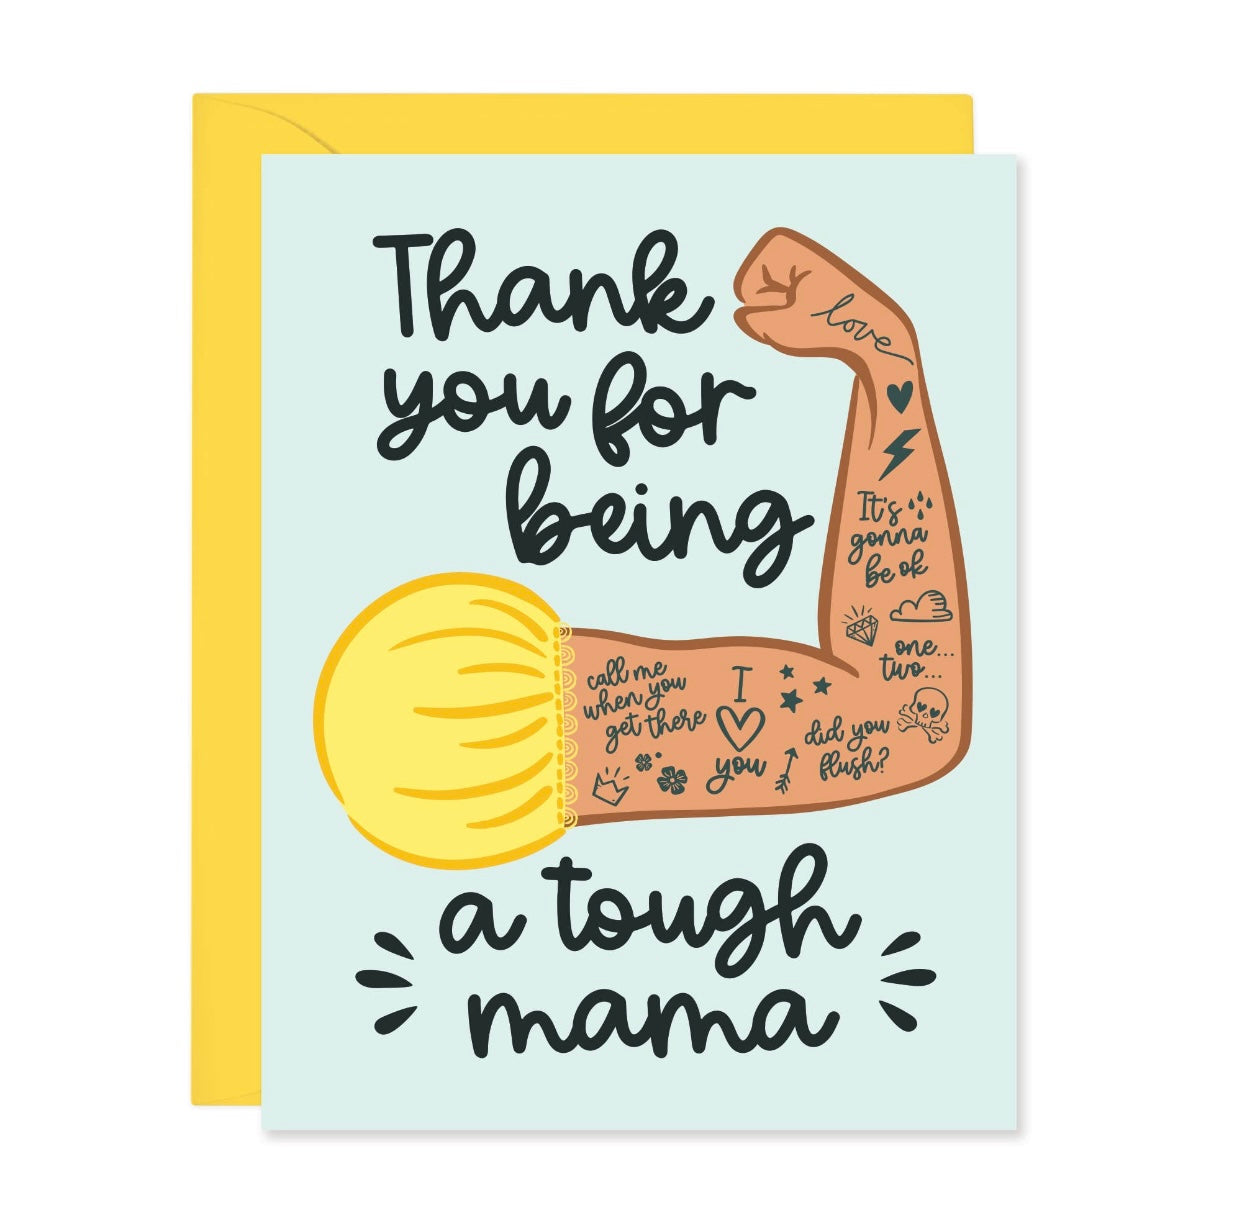 Tough Mama - Mother’s Day Card